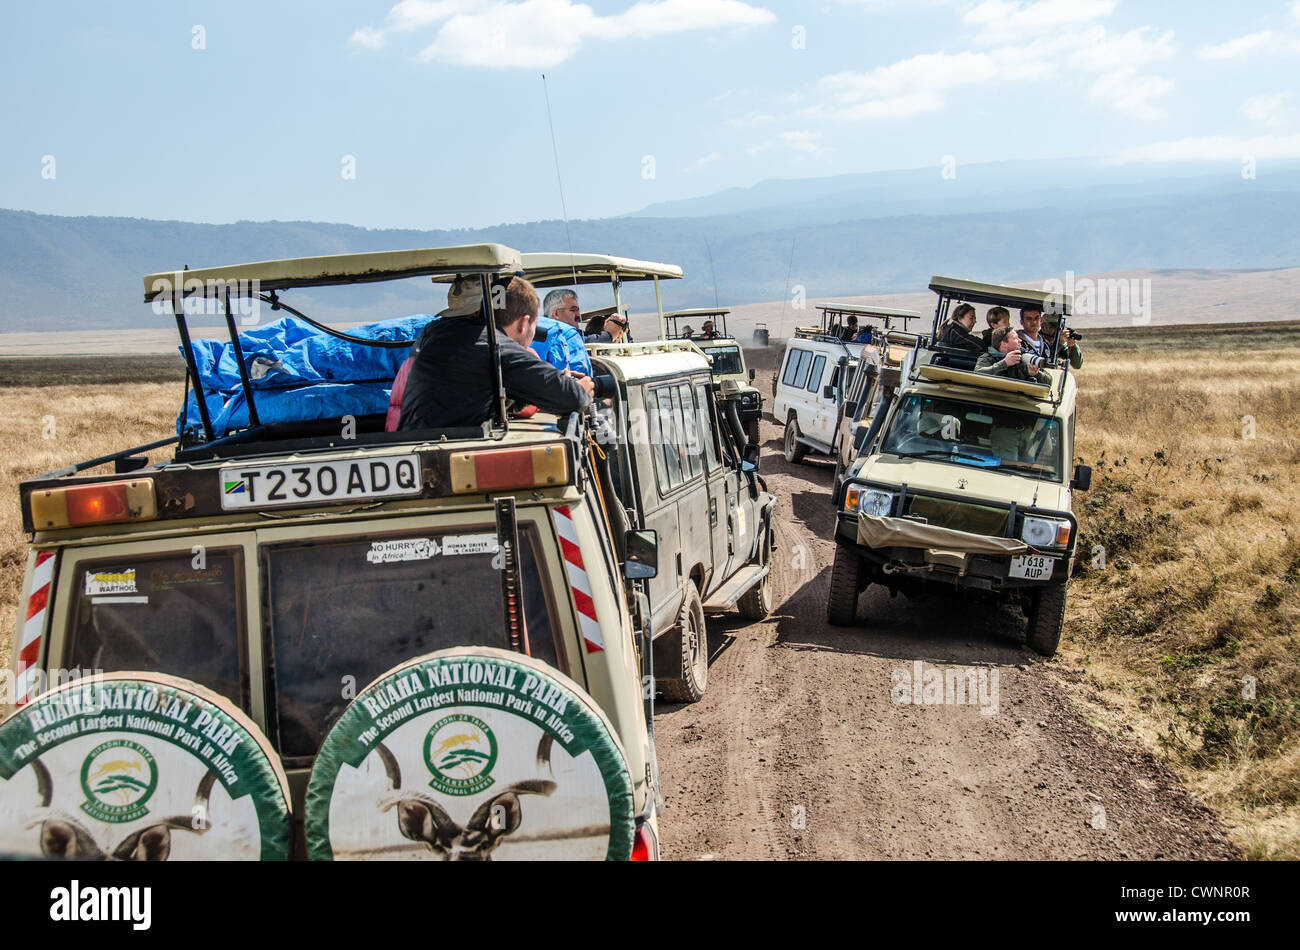 NGORONGORO CONSERVATIONAL AREA, Tanzania - A group of safari vehicles creates a traffic jam as the drivers all stop next to an eagle feeding at Ngorongoro Crater in the Ngorongoro Conservation Area, part of Tanzania's northern circuit of national parks and nature preserves. The Ngorongoro Crater, a UNESCO World Heritage Site, is a vast volcanic caldera in northern Tanzania. Created 2-3 million years ago, it measures about 20 kilometers in diameter and is home to diverse wildlife, including the 'Big Five' game animals. The Ngorongoro Conservation Area, inhabited by the Maasai people, also conta Stock Photo